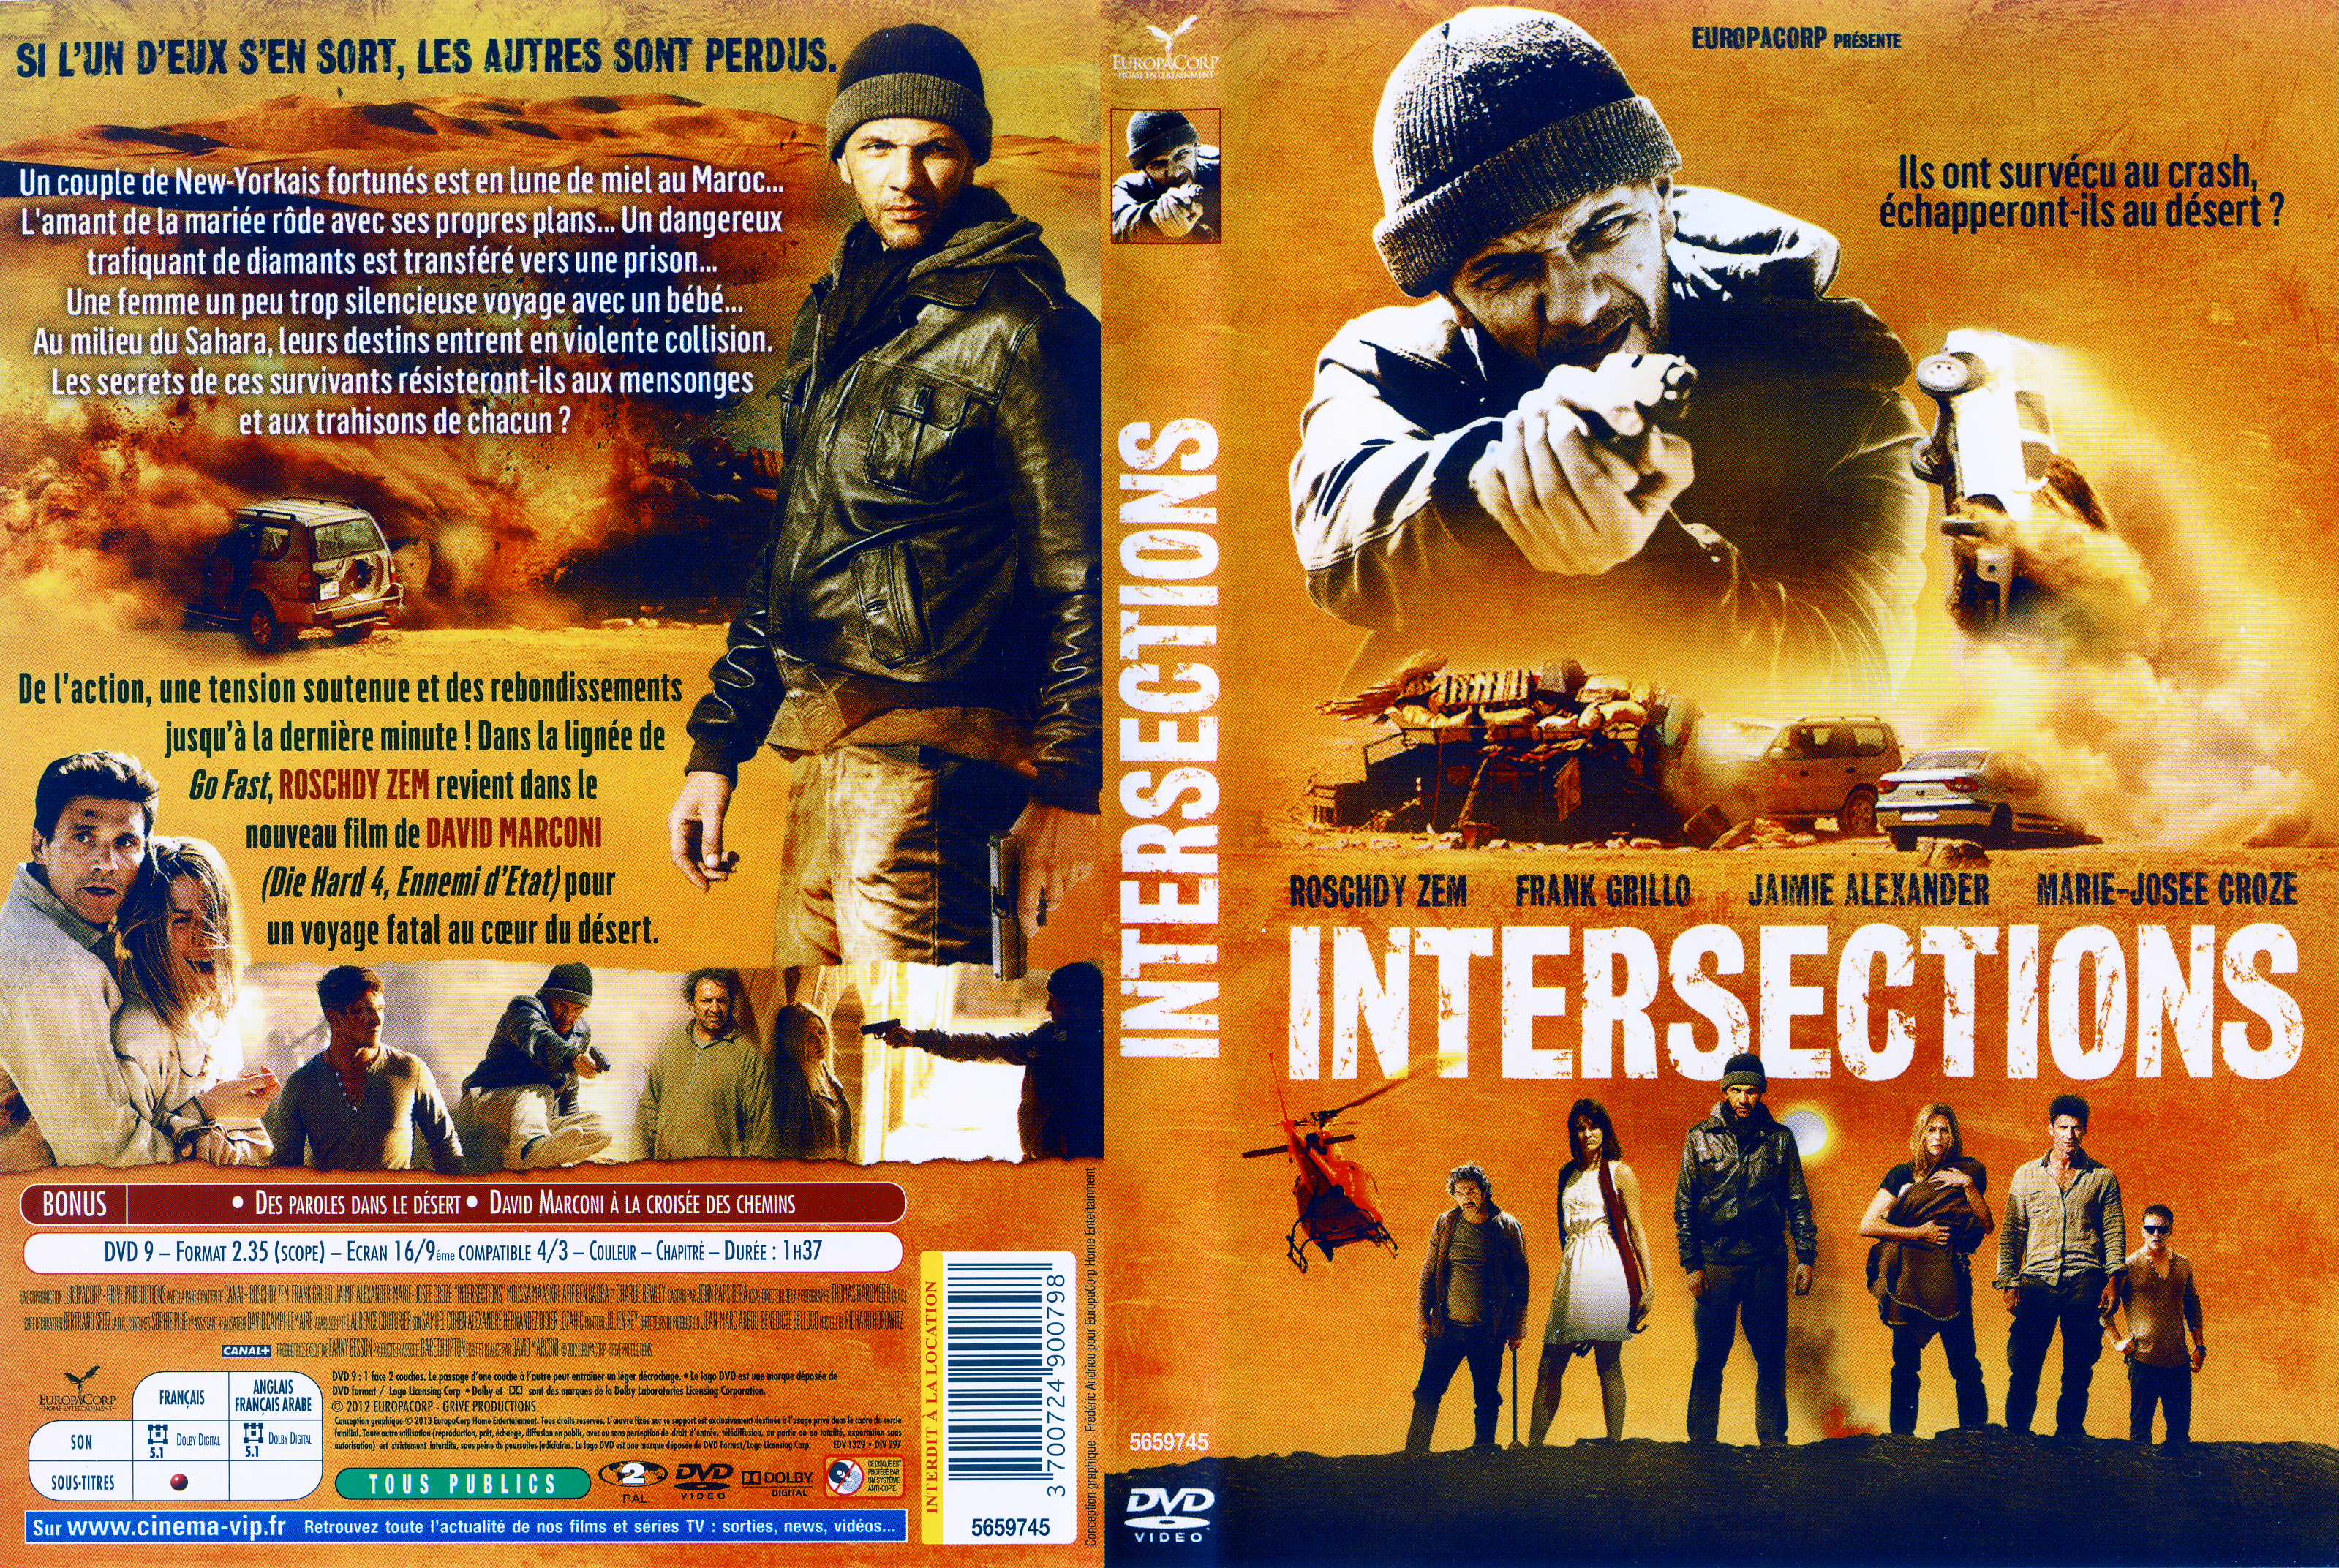 Jaquette DVD Intersections